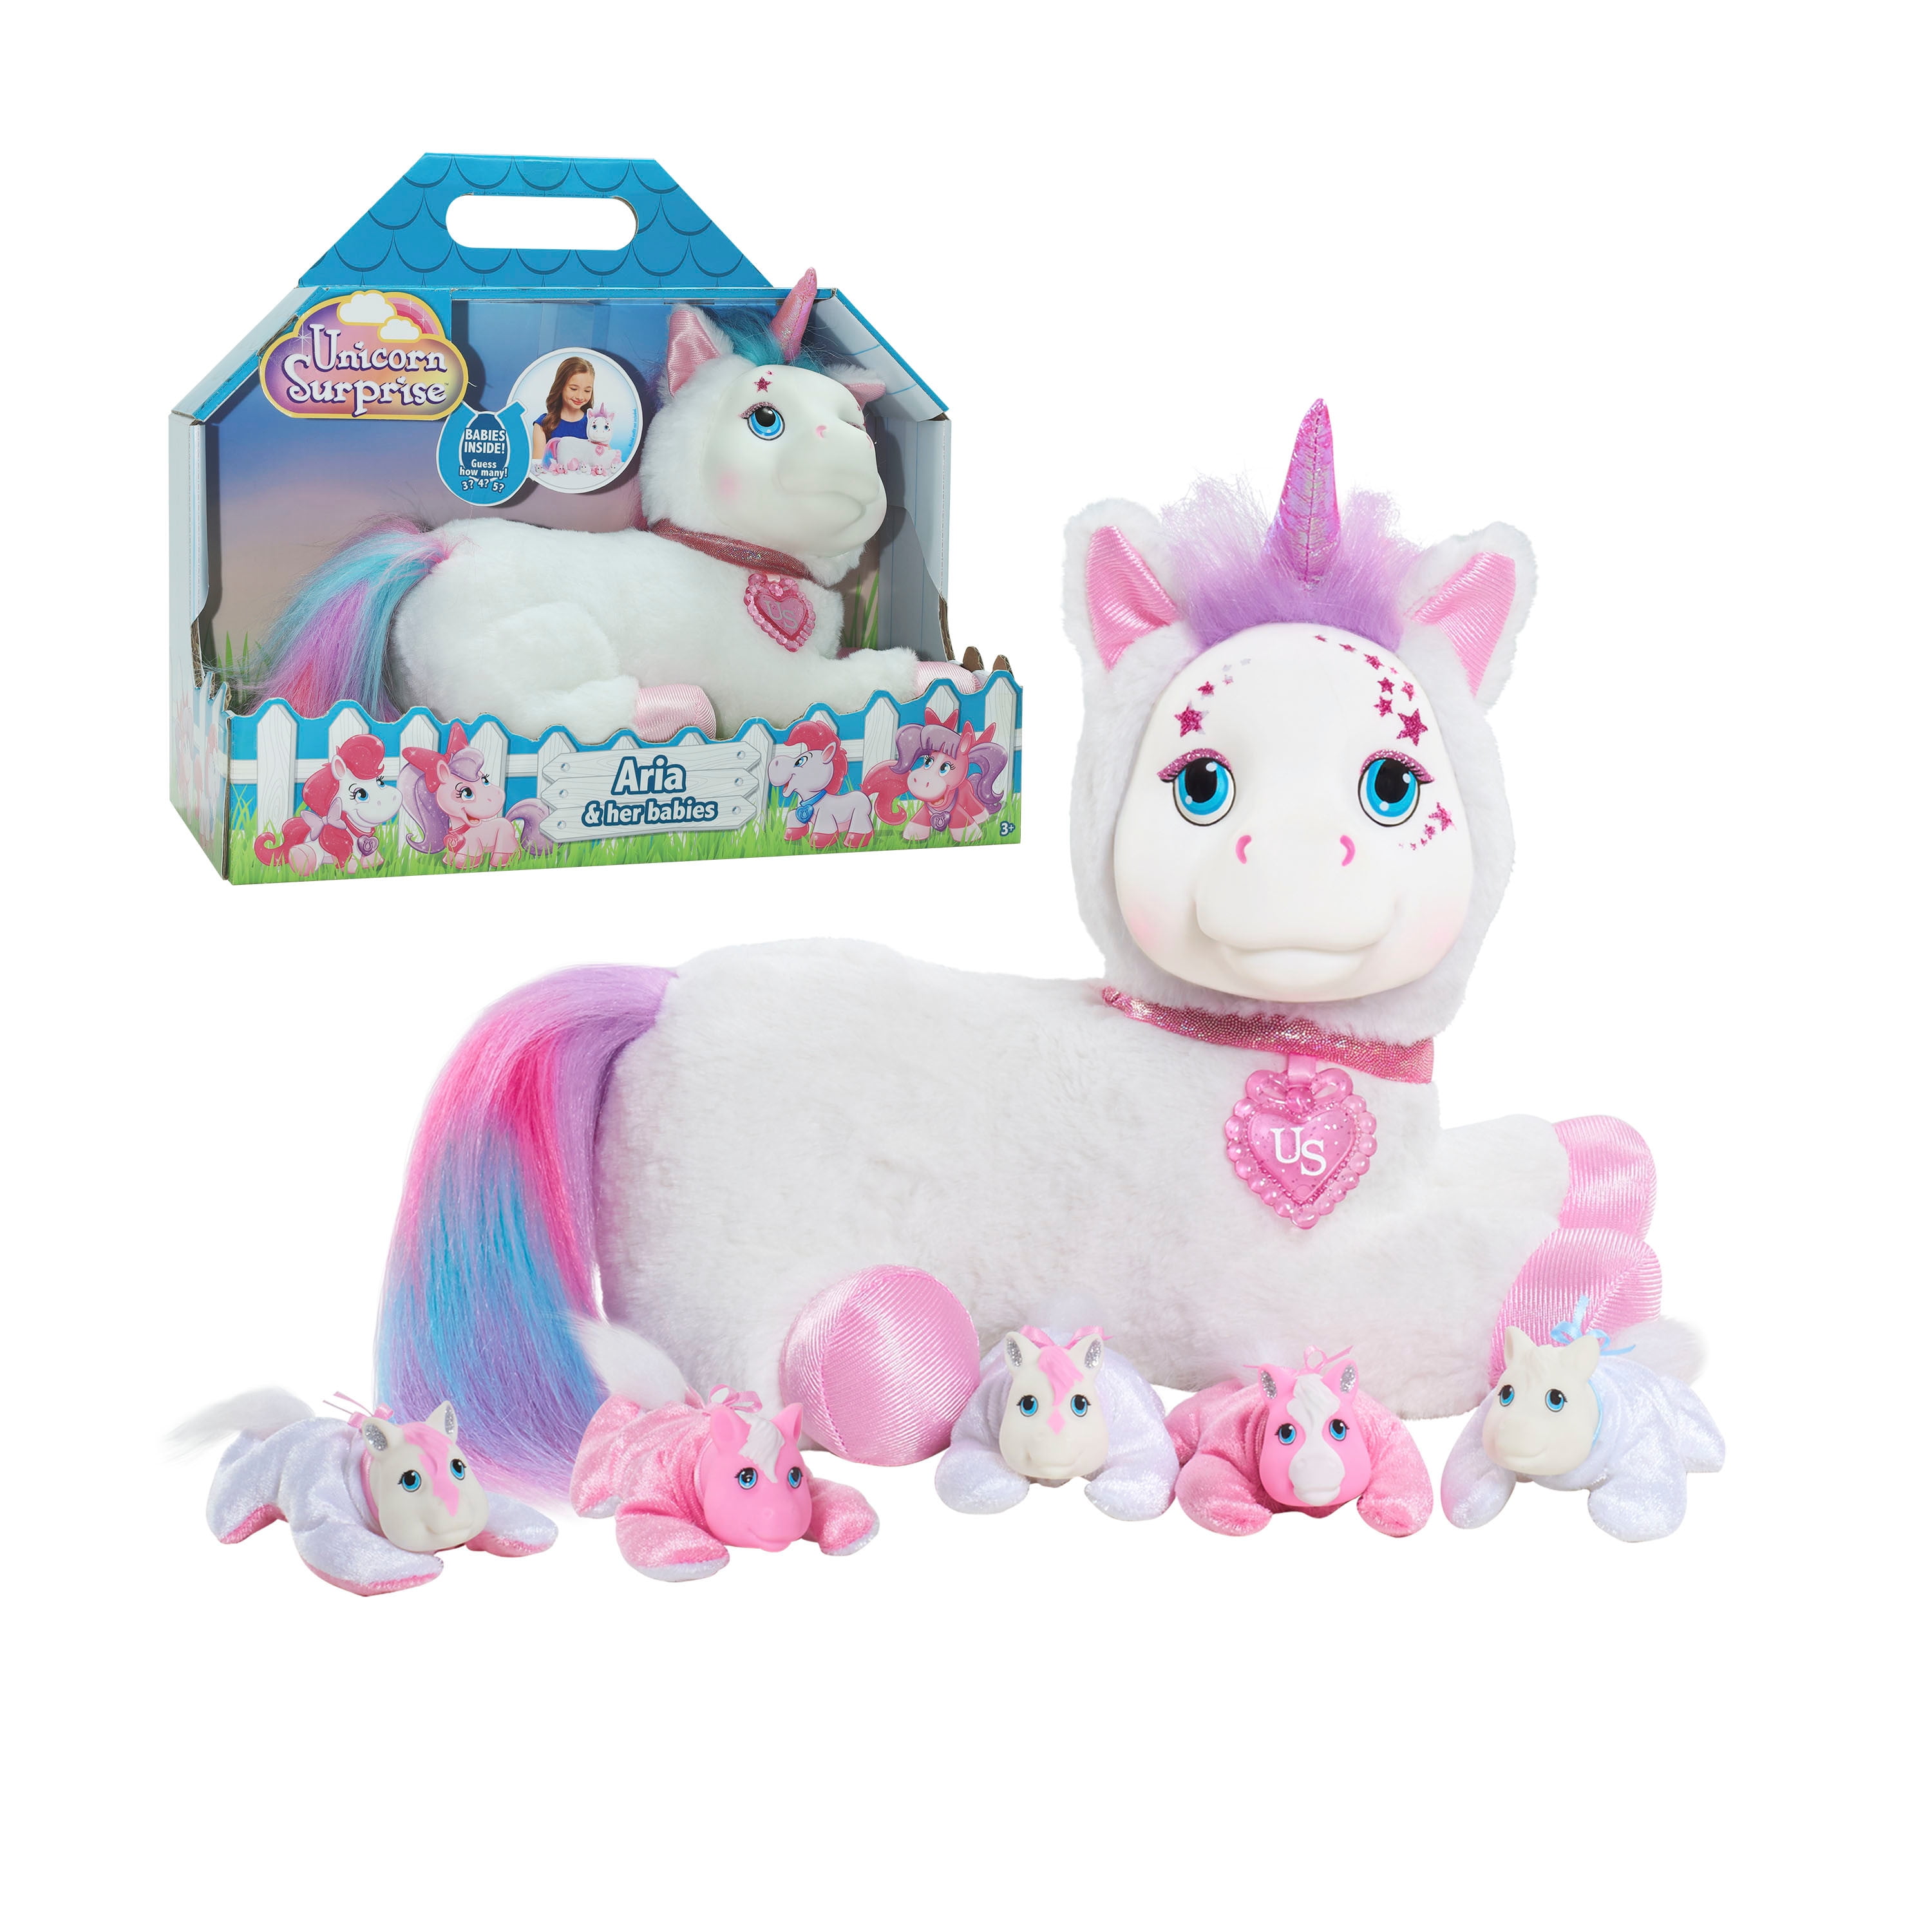 Unicorn Surprise Aria, White, Stuffed Animal Unicorn and Babies, Toys for  Kids, Kids Toys for Ages 3 Up, Gifts and Presents 